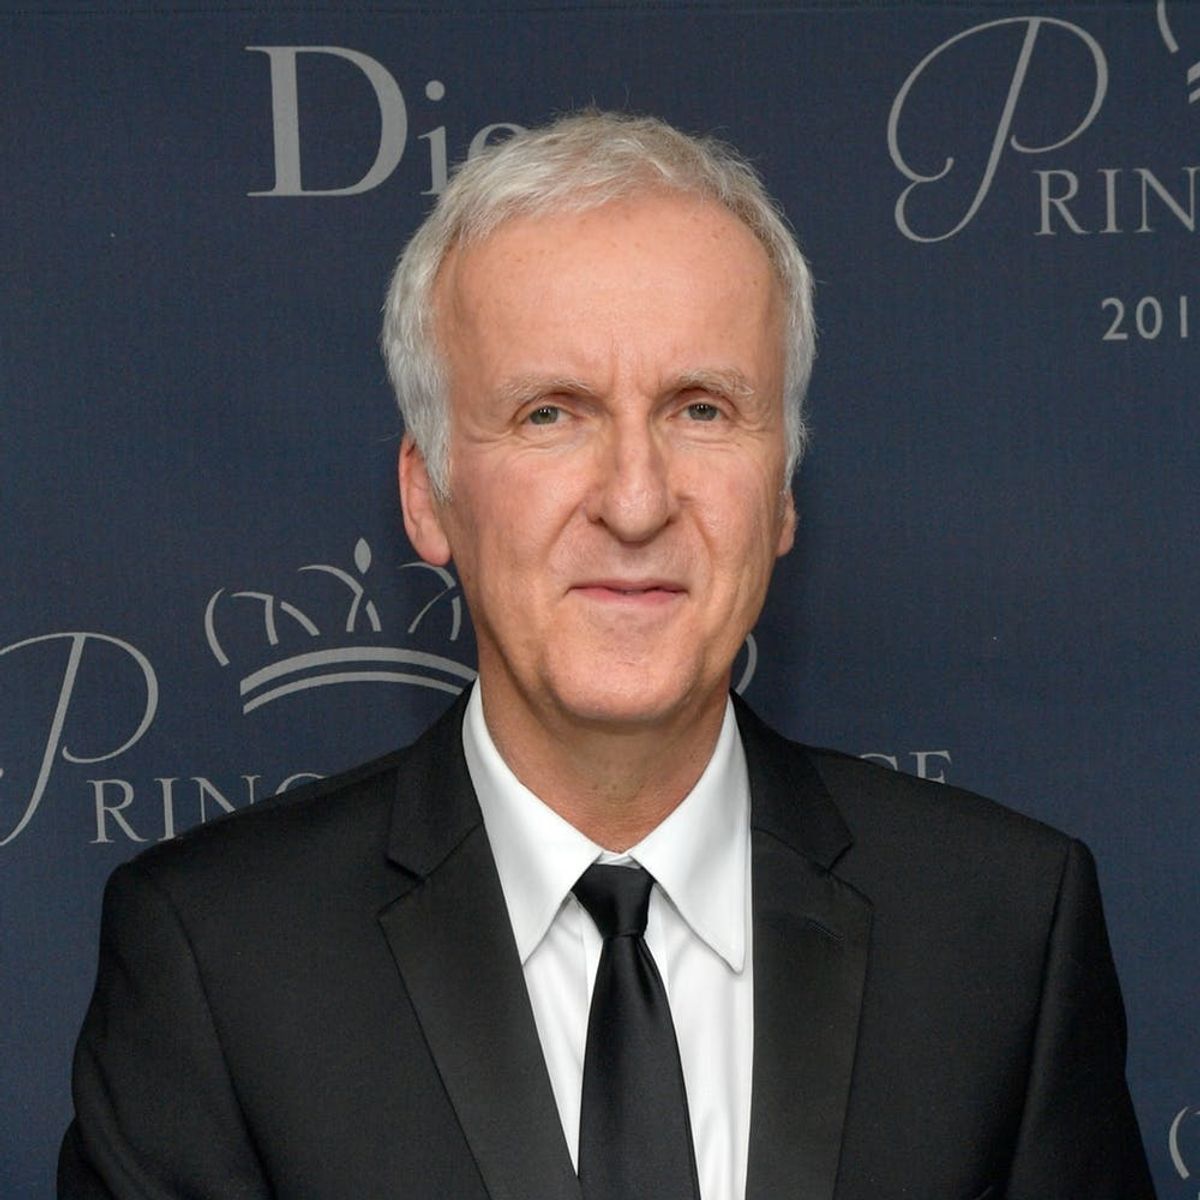 James Cameron FINALLY Explains Why Jack Didn’t Fit on the Door in “Titanic”